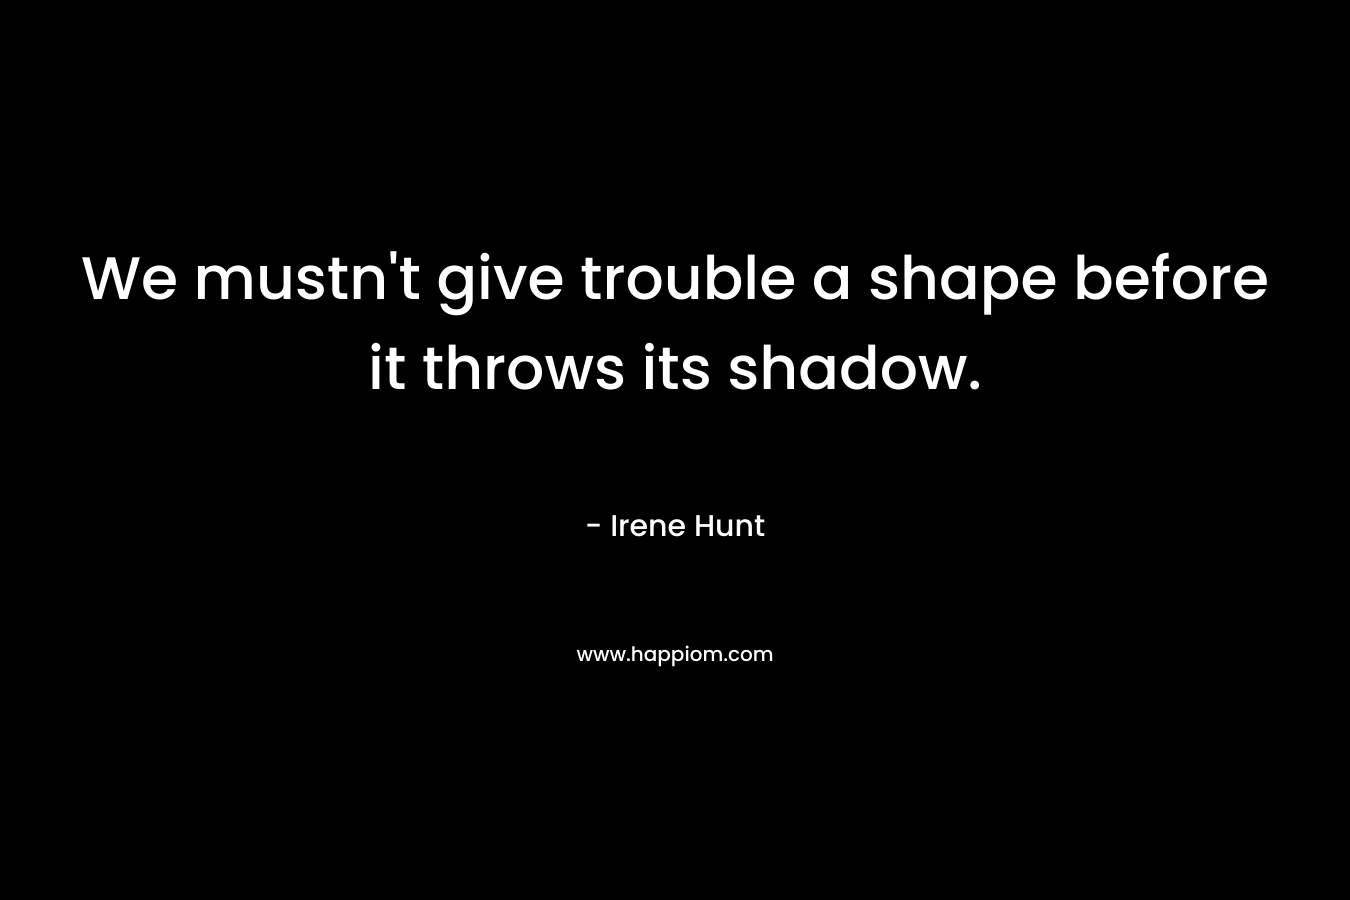 We mustn't give trouble a shape before it throws its shadow.